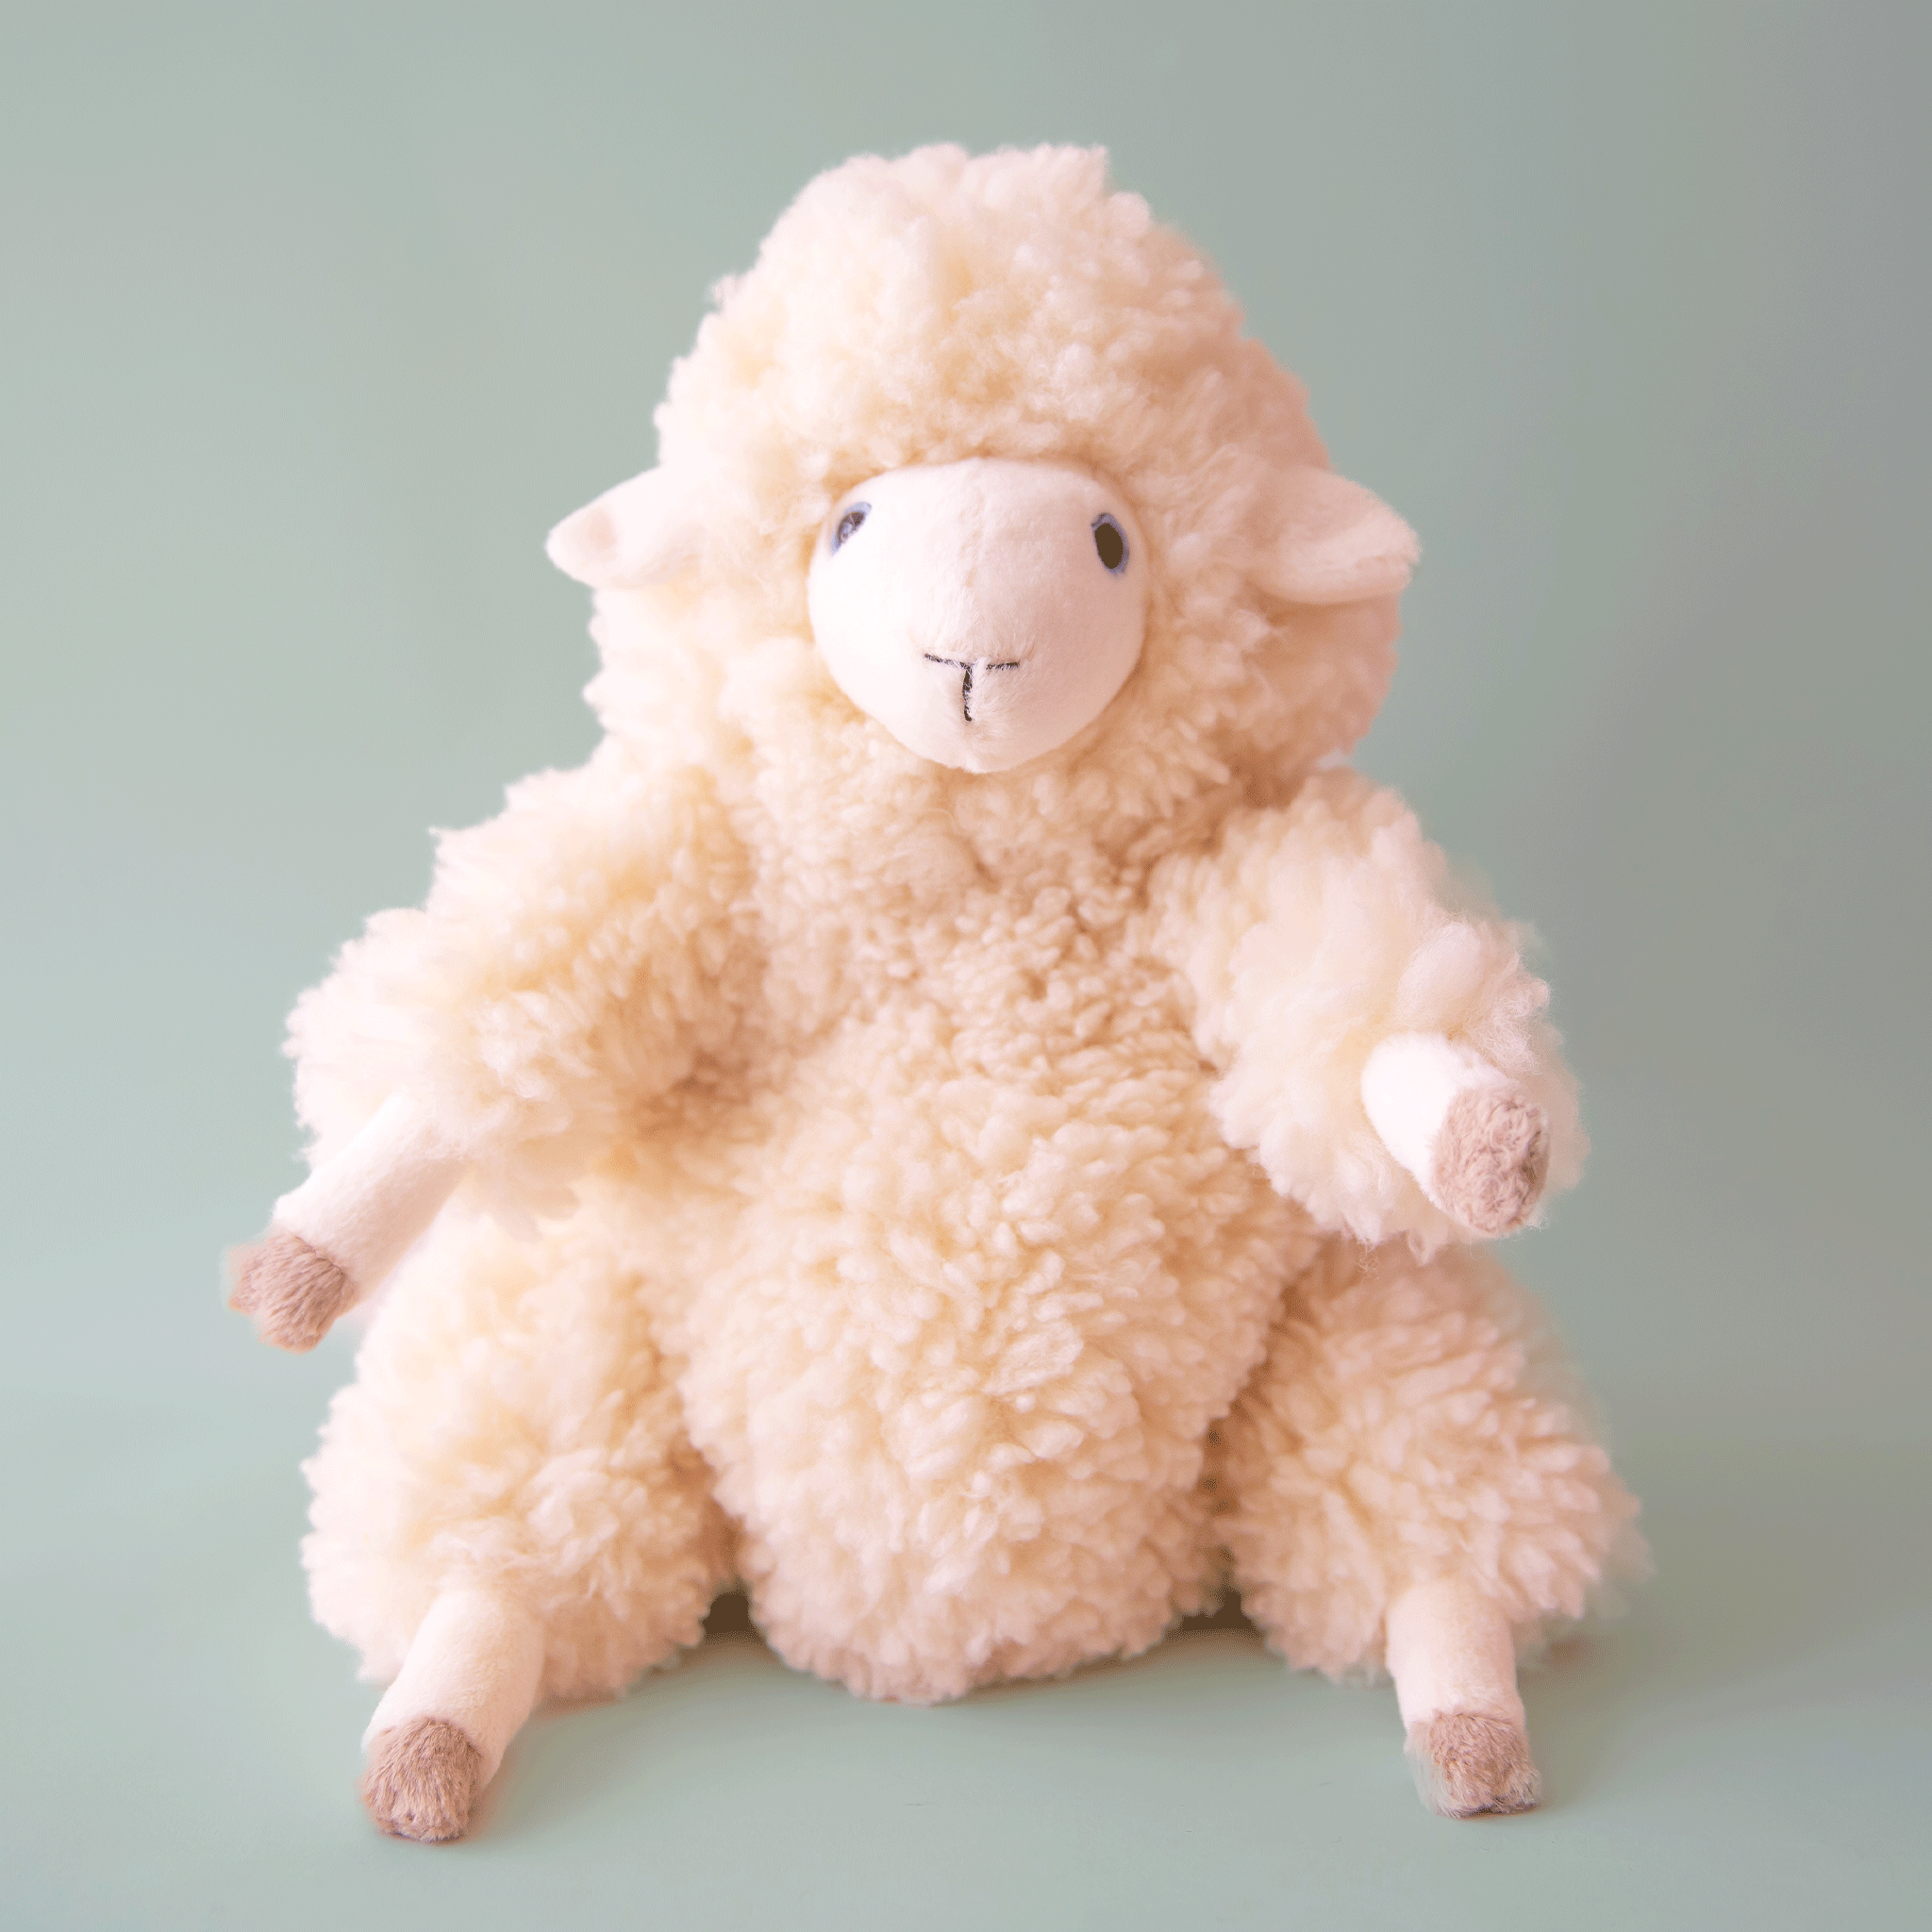 On a blue background is an ivory fluffy sheep stuffed animal toy.